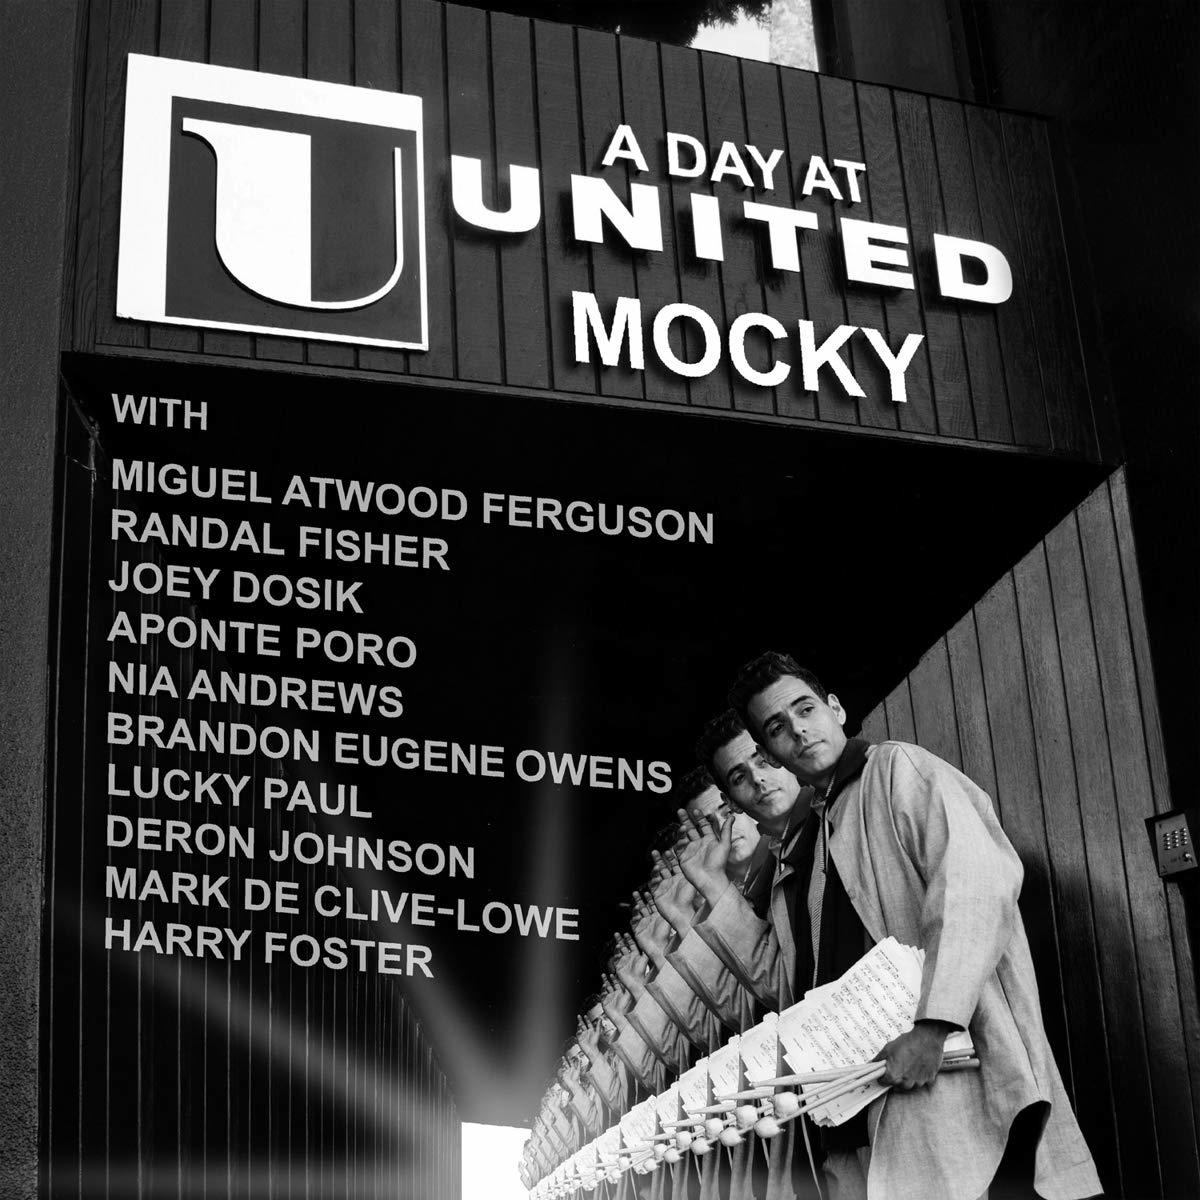 (LP Day A United Mocky + - - Download) At